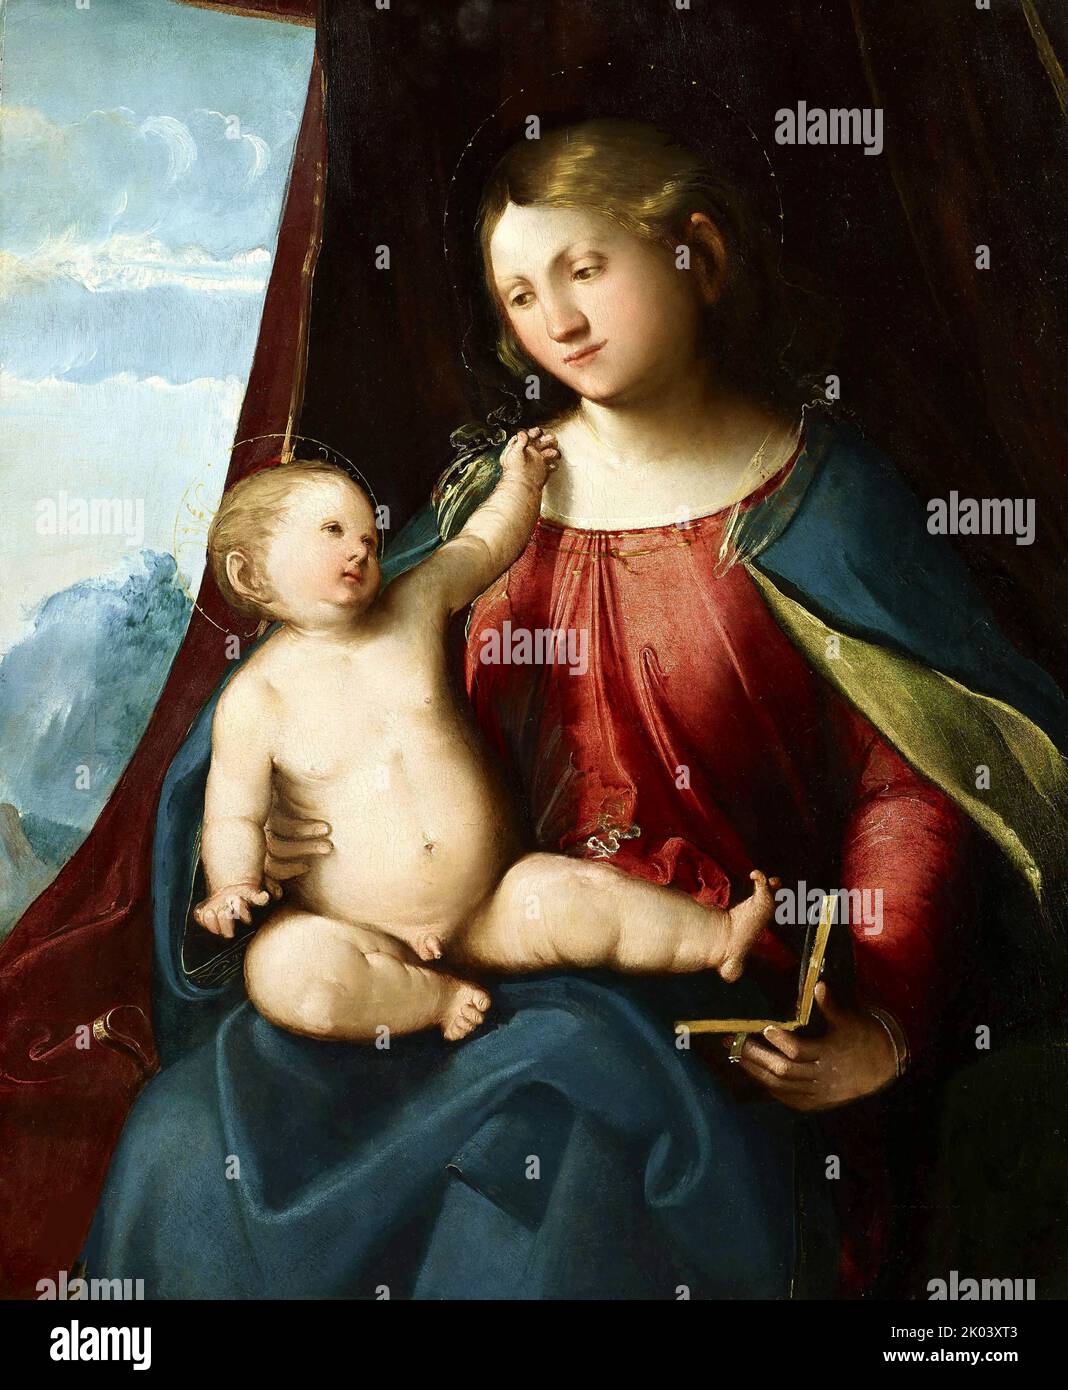 Virgin and Child, c. 1520. Found in the collection of the Accademia Carrara, Bergamo. Stock Photo